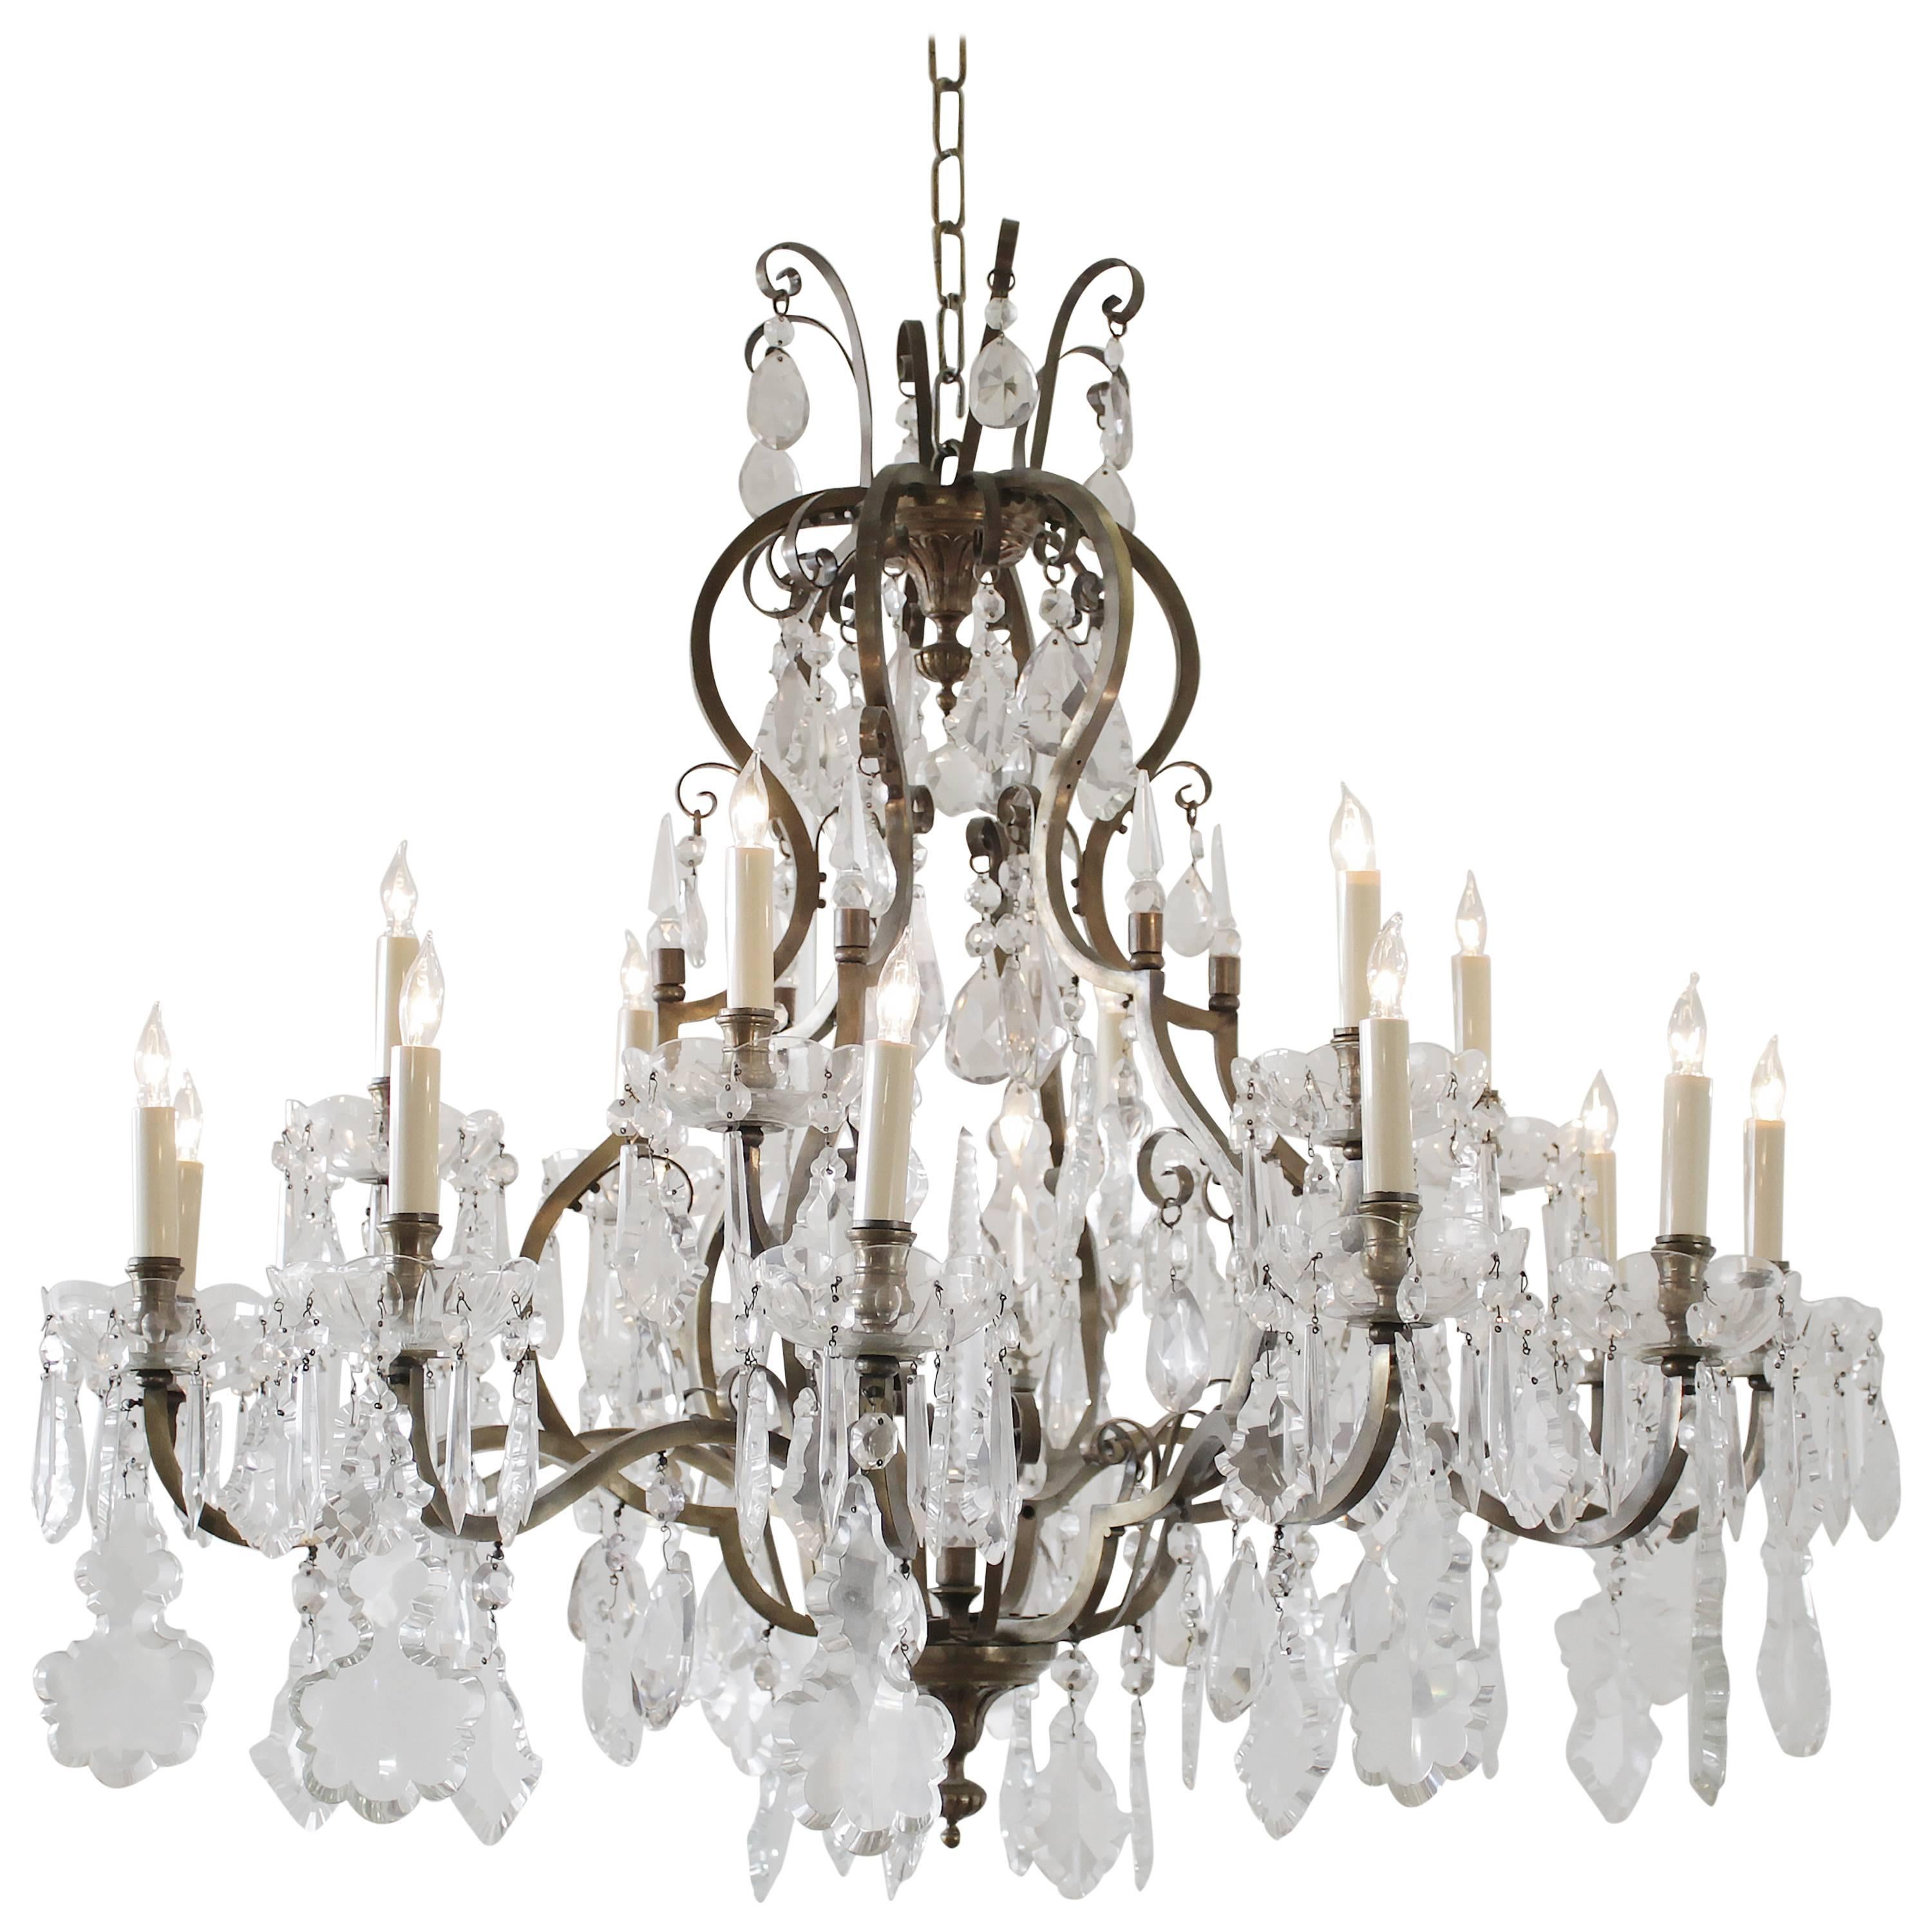 Large French Bronze and Crystal Chandelier with 18 Lights